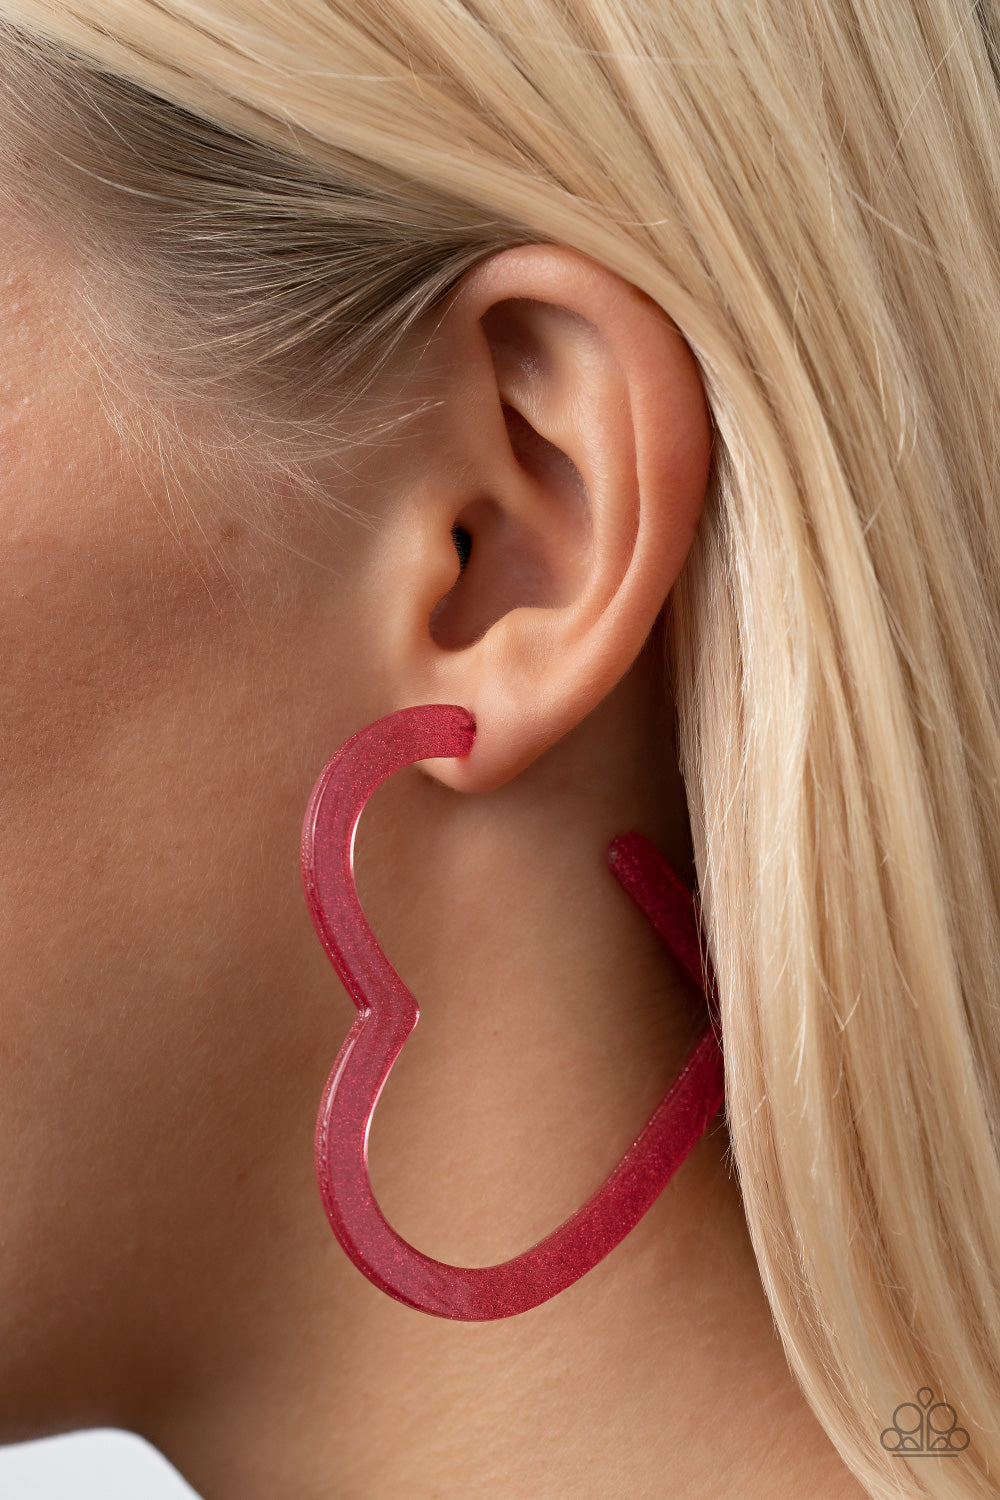 Heart-Throbbing Twinkle - Pink Acrylic Heart Hoop Earrings dusted in sparkles, a pink acrylic frame delicately curls into a flat heart frame for a flirtatious finish. Earring attaches to a standard post fitting. Hoop measures approximately 2 1/2" in diameter.  Sold as one pair of hoop earrings.